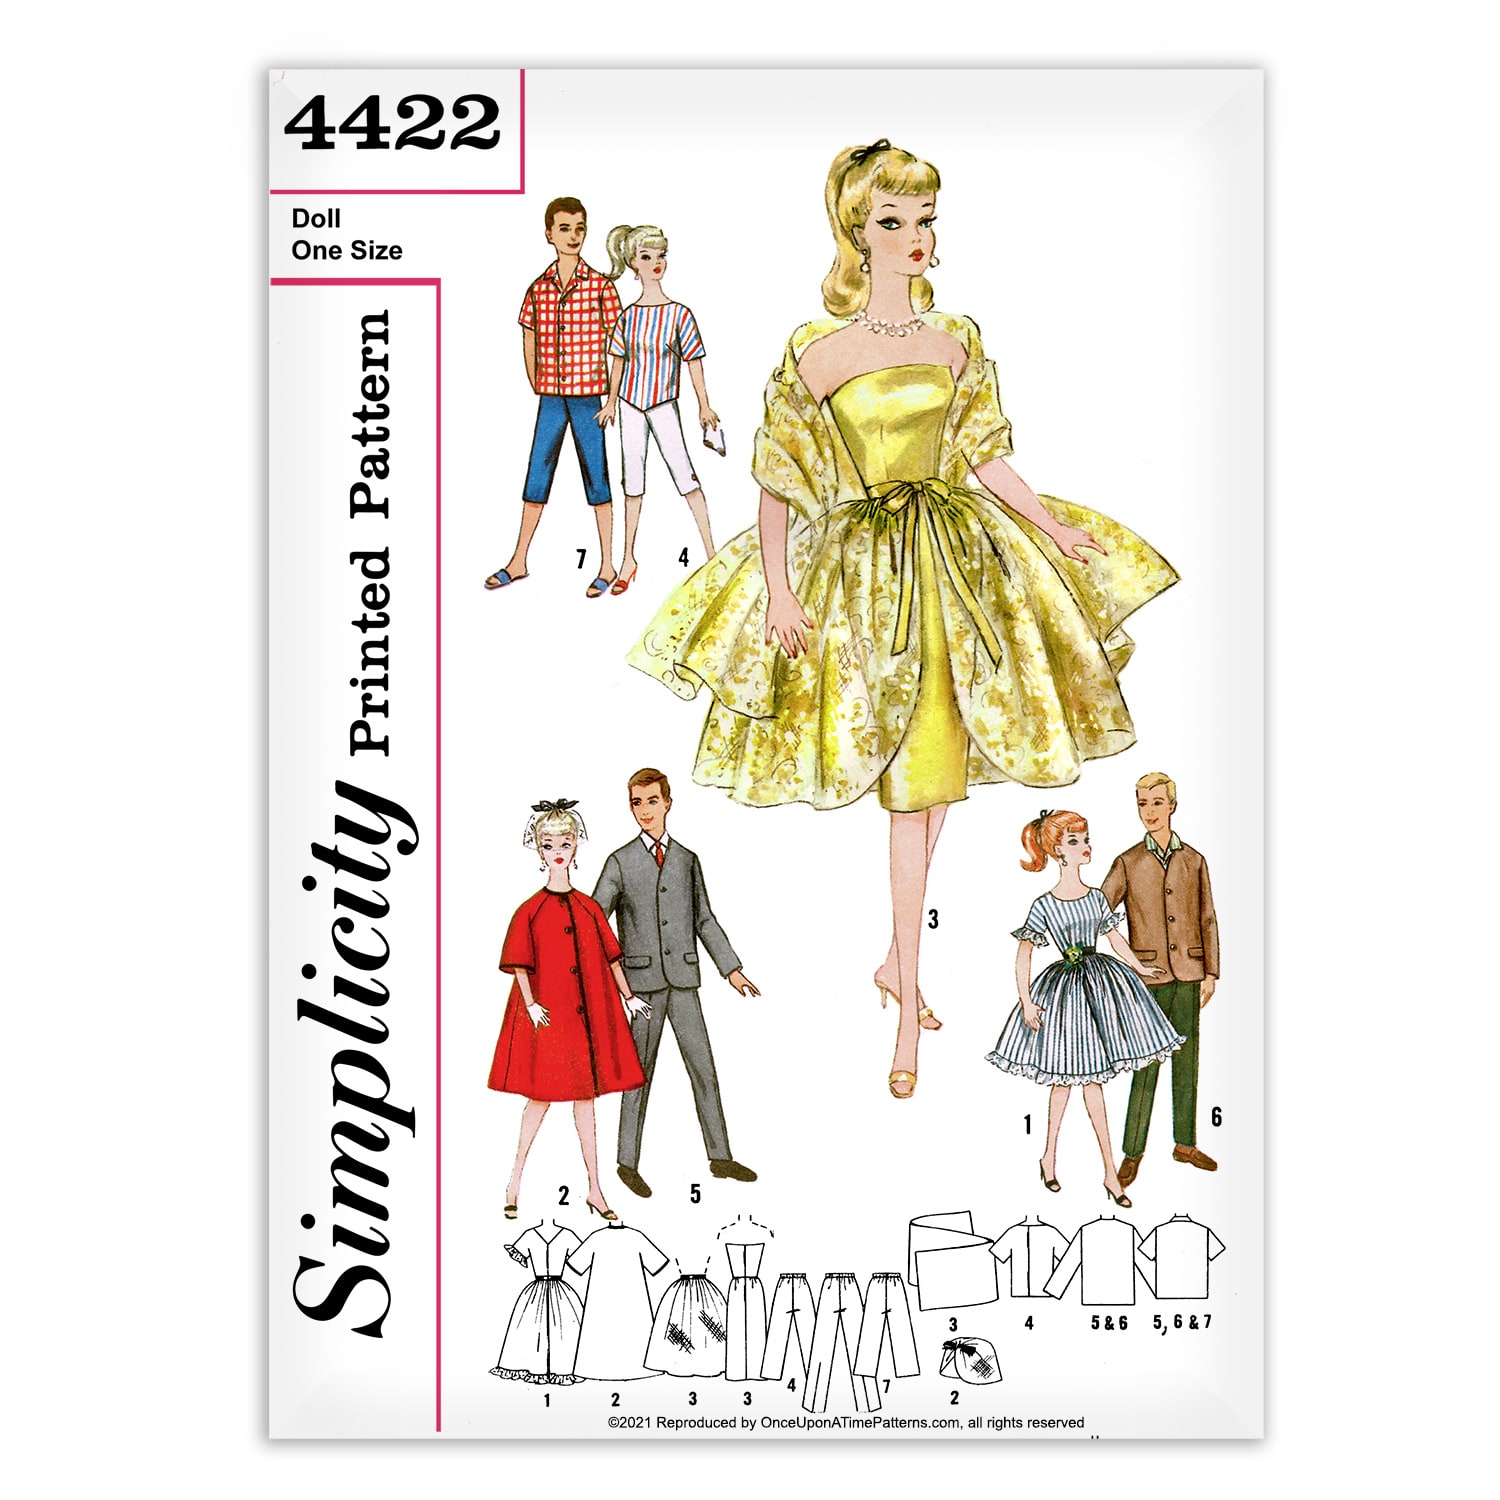 Barbie and Ken Doll Clothing Pattern Simplicity 4422 - Vintage